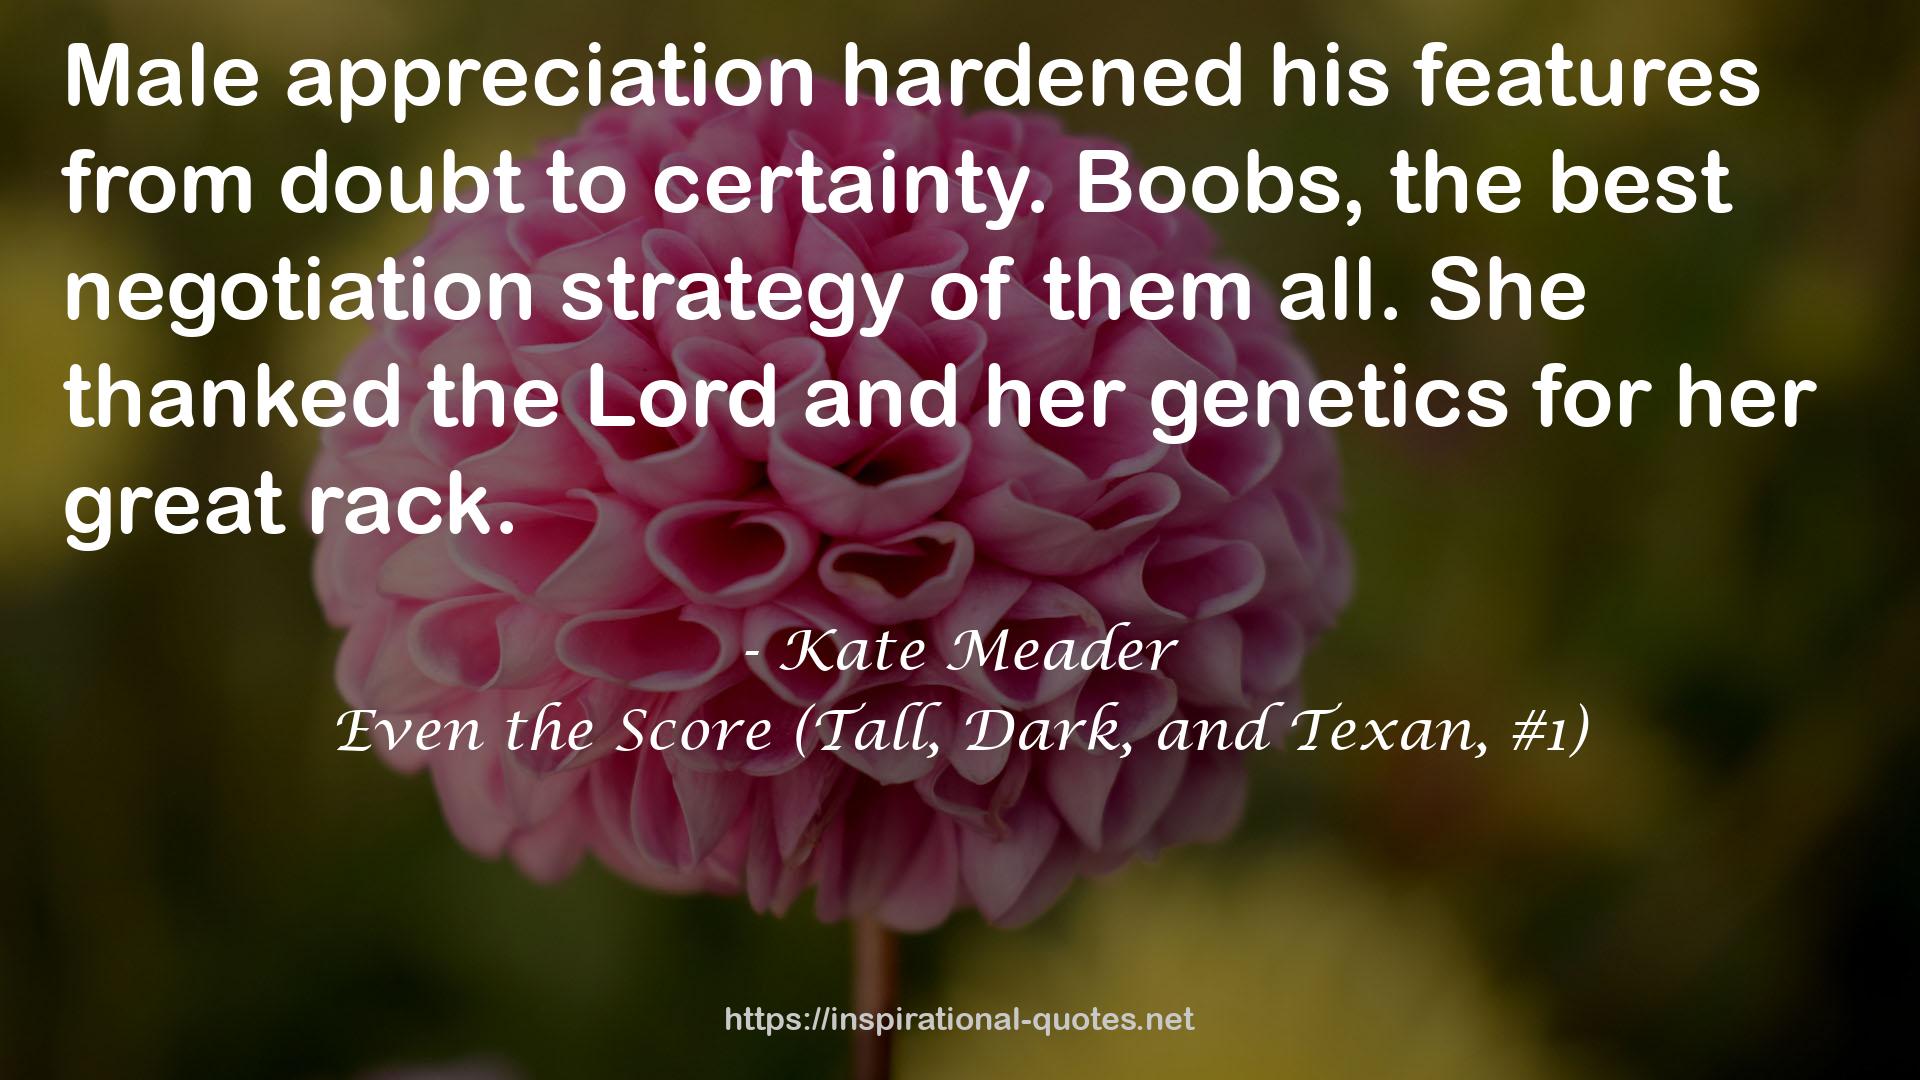 Kate Meader QUOTES